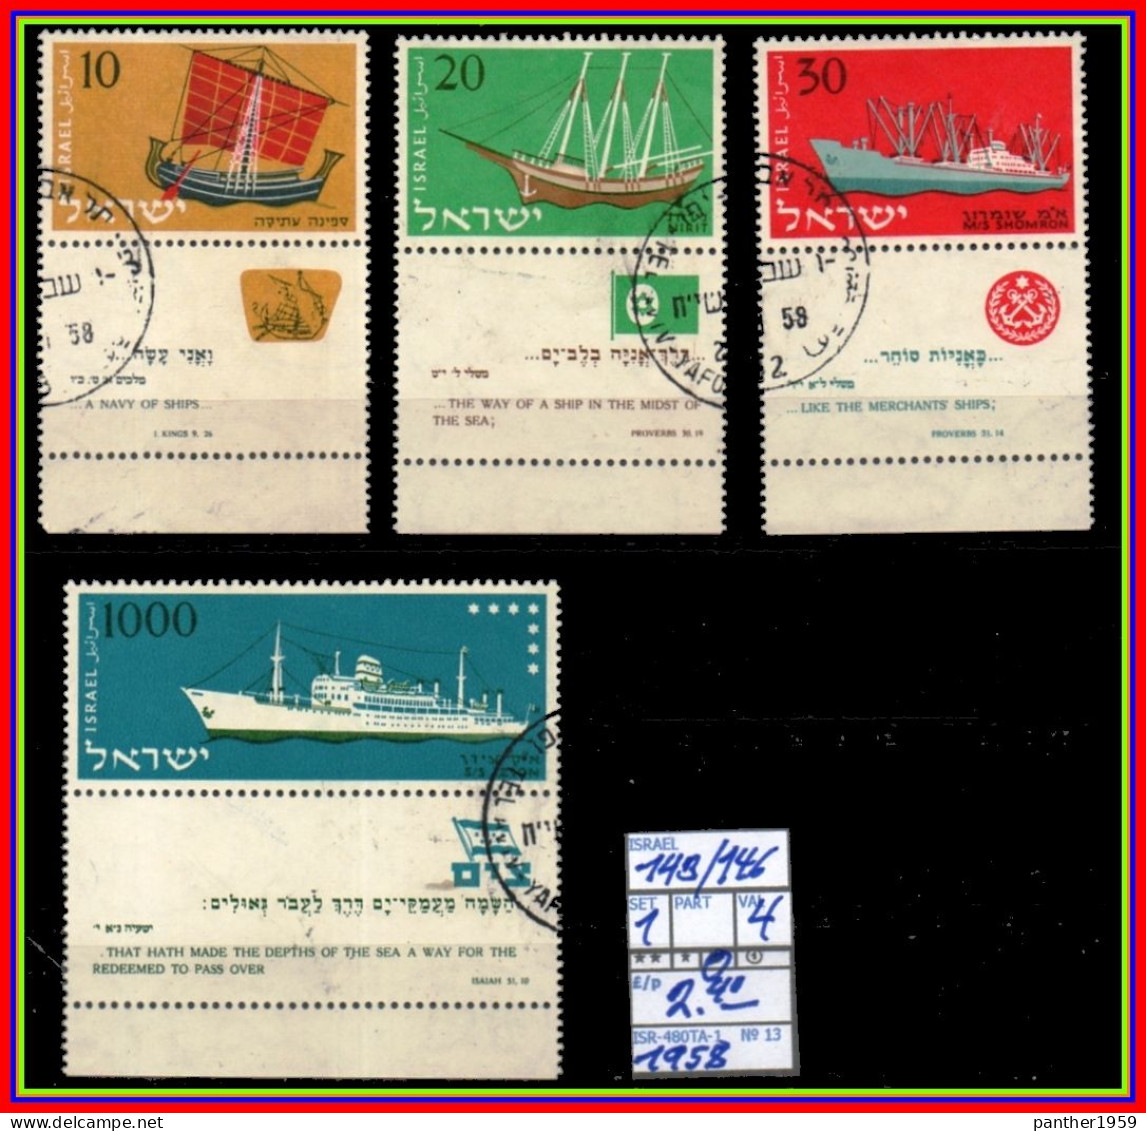 ASIA# ISRAEL# #COMMEMORATIVE SERIES WITH TABS# USED# (ISR-280TA-1) (13) - Oblitérés (avec Tabs)